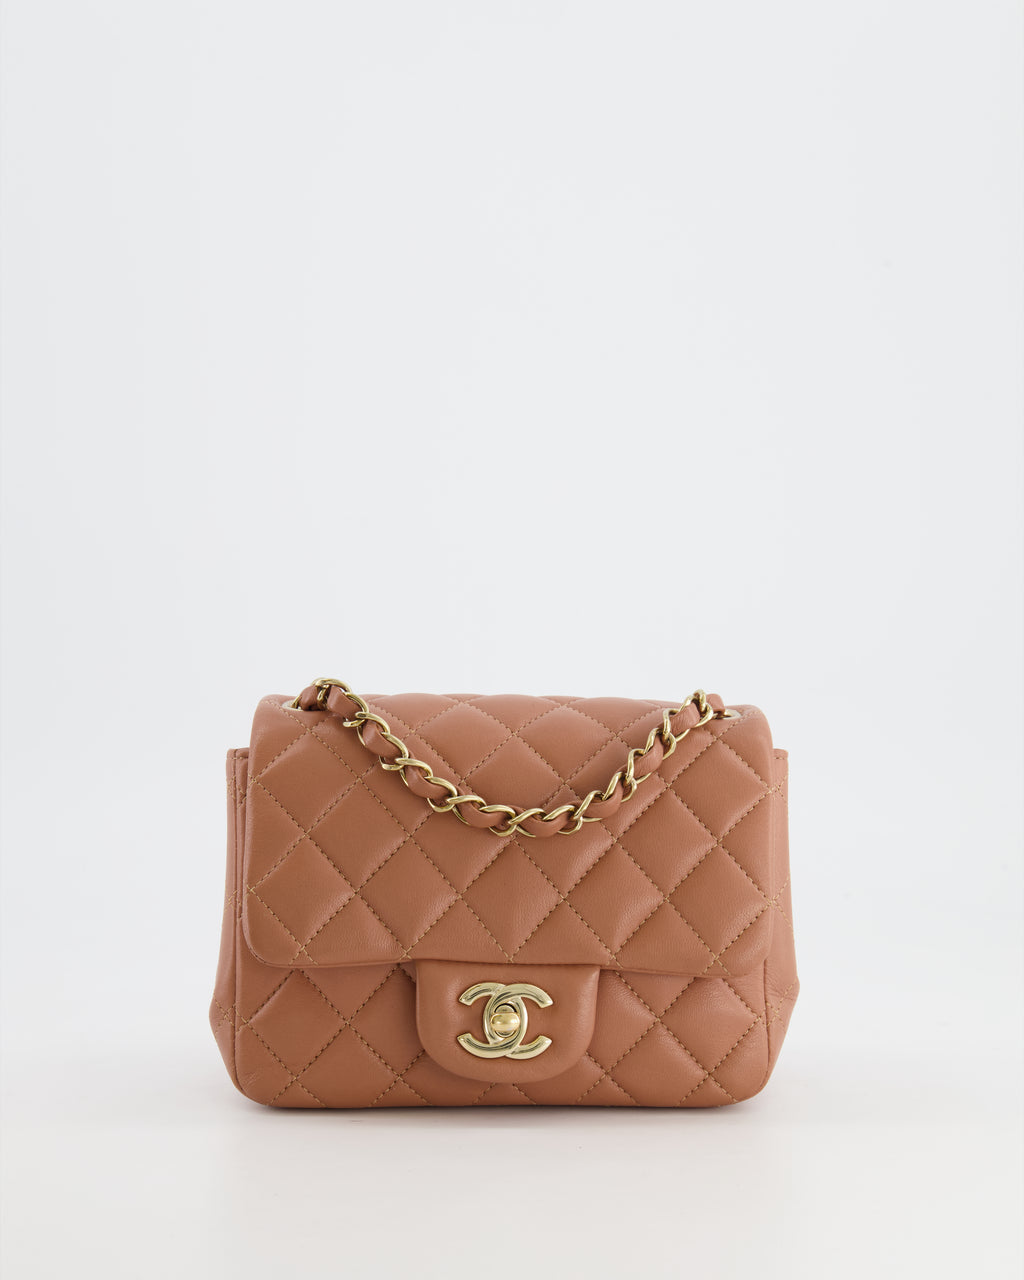 RARE* Chanel Caramel Mini Square Bag in Lambskin Leather with